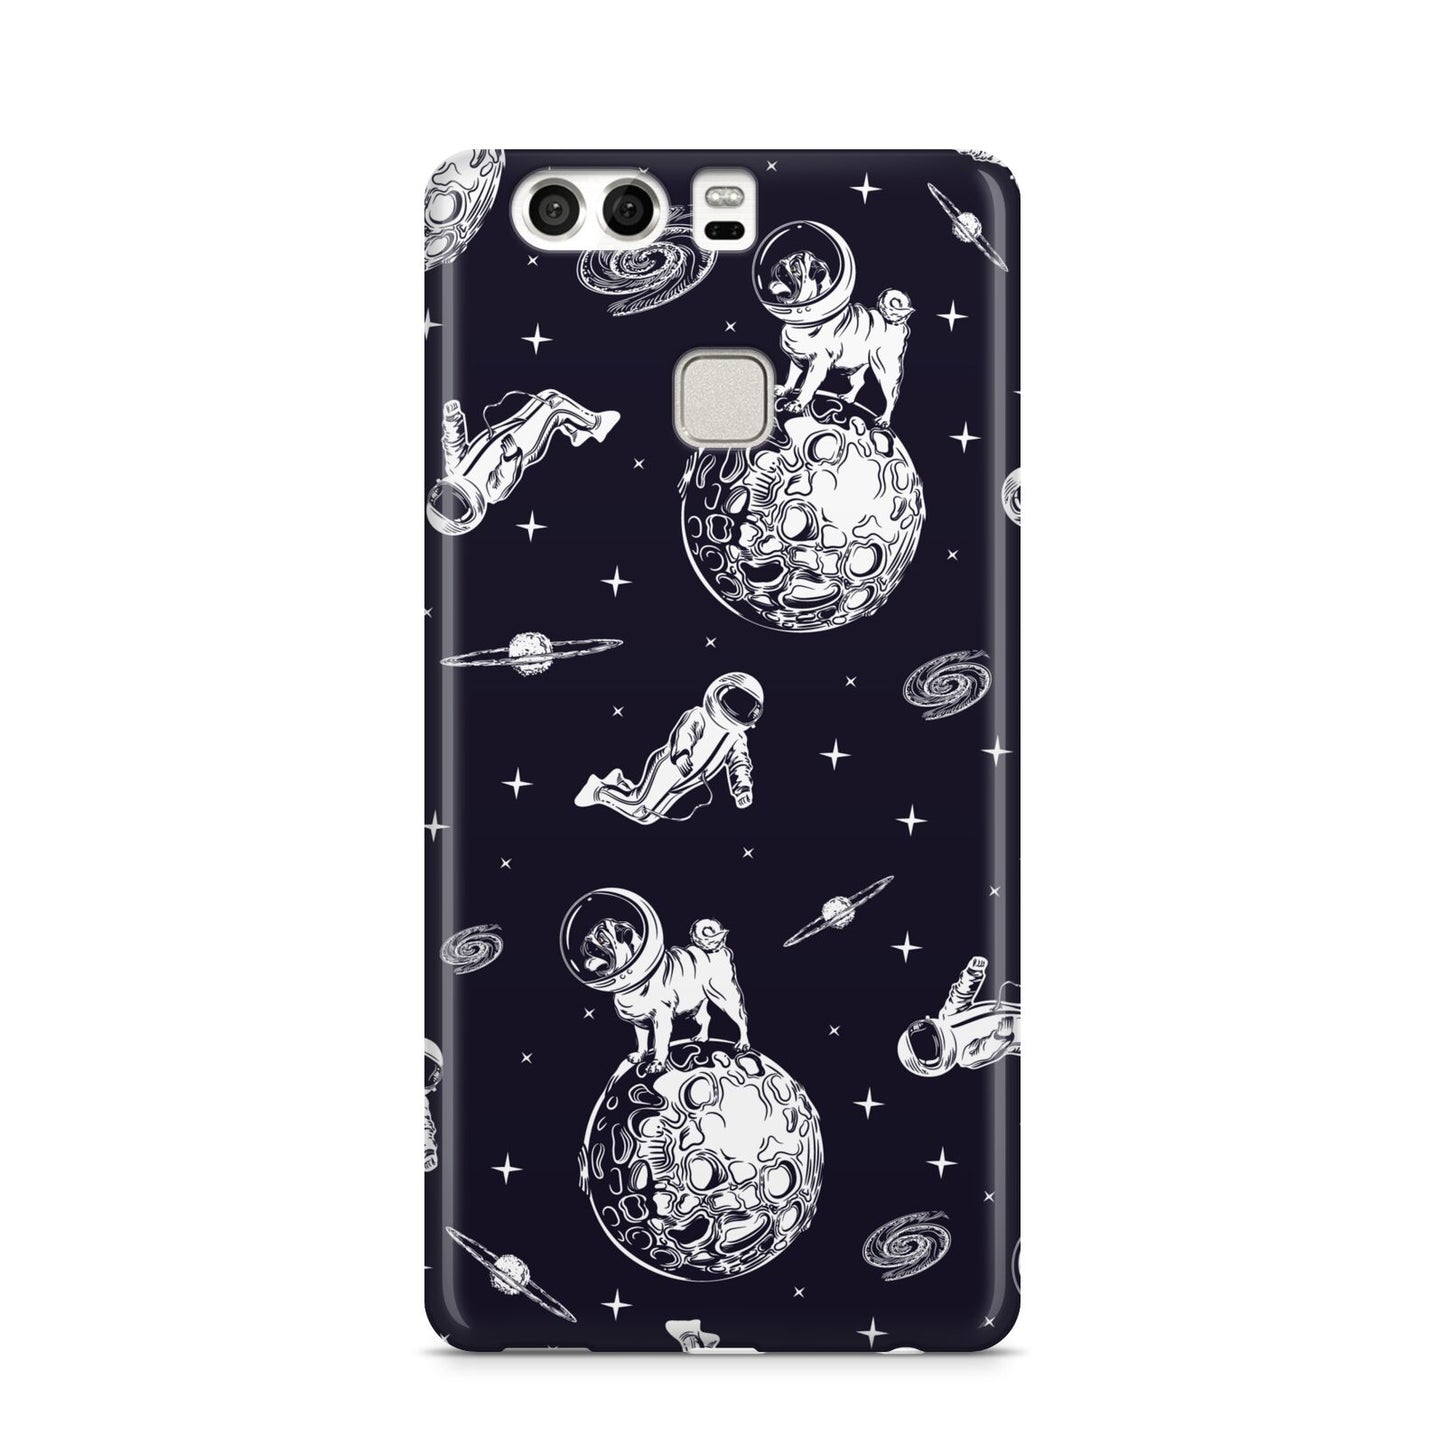 Pug in Space Huawei P9 Case